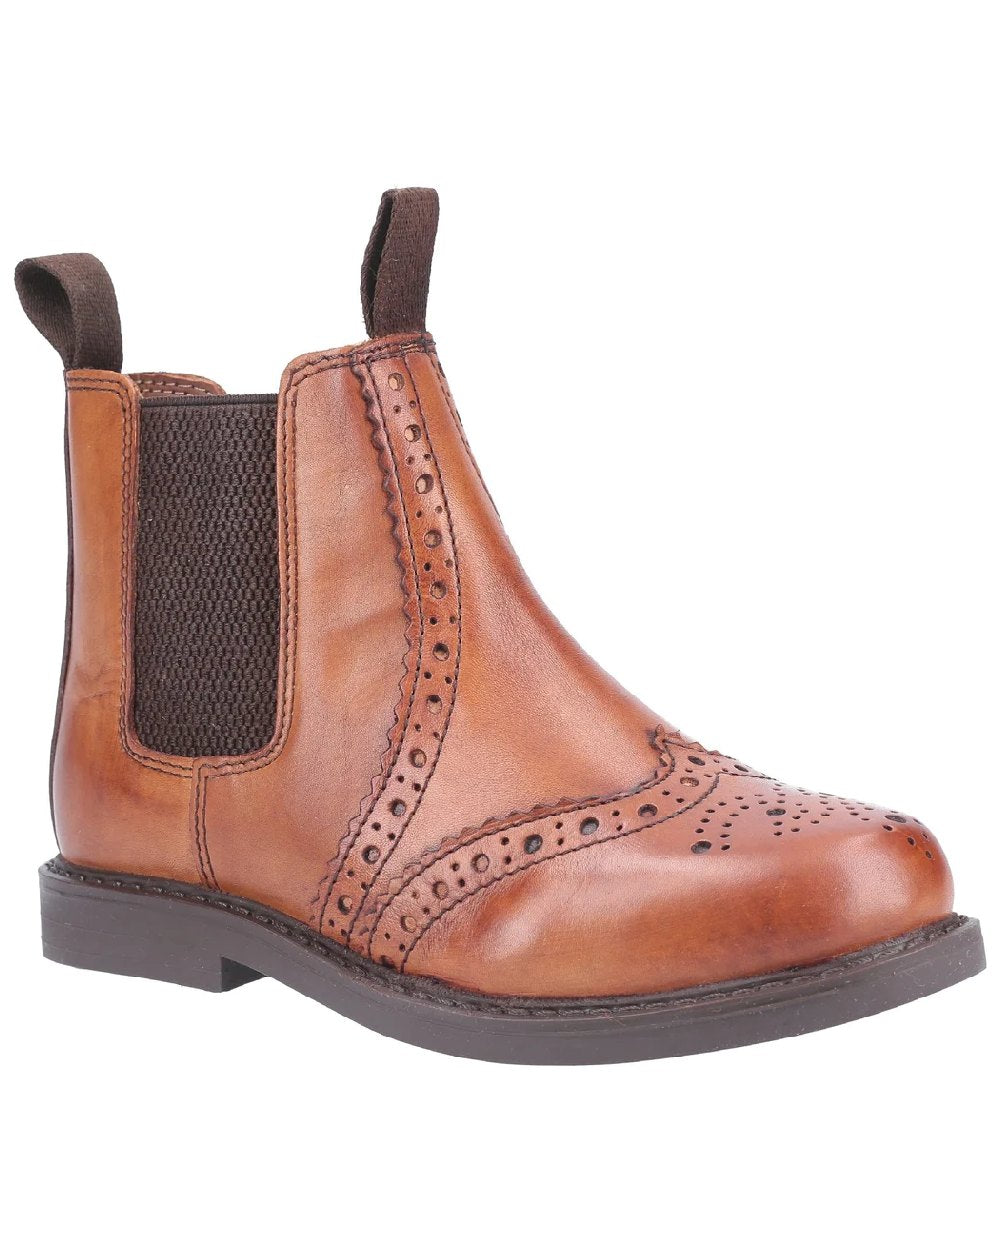 Cotswold Childrens Nympsfield Brogue Pull On Chelsea Boots in Tan